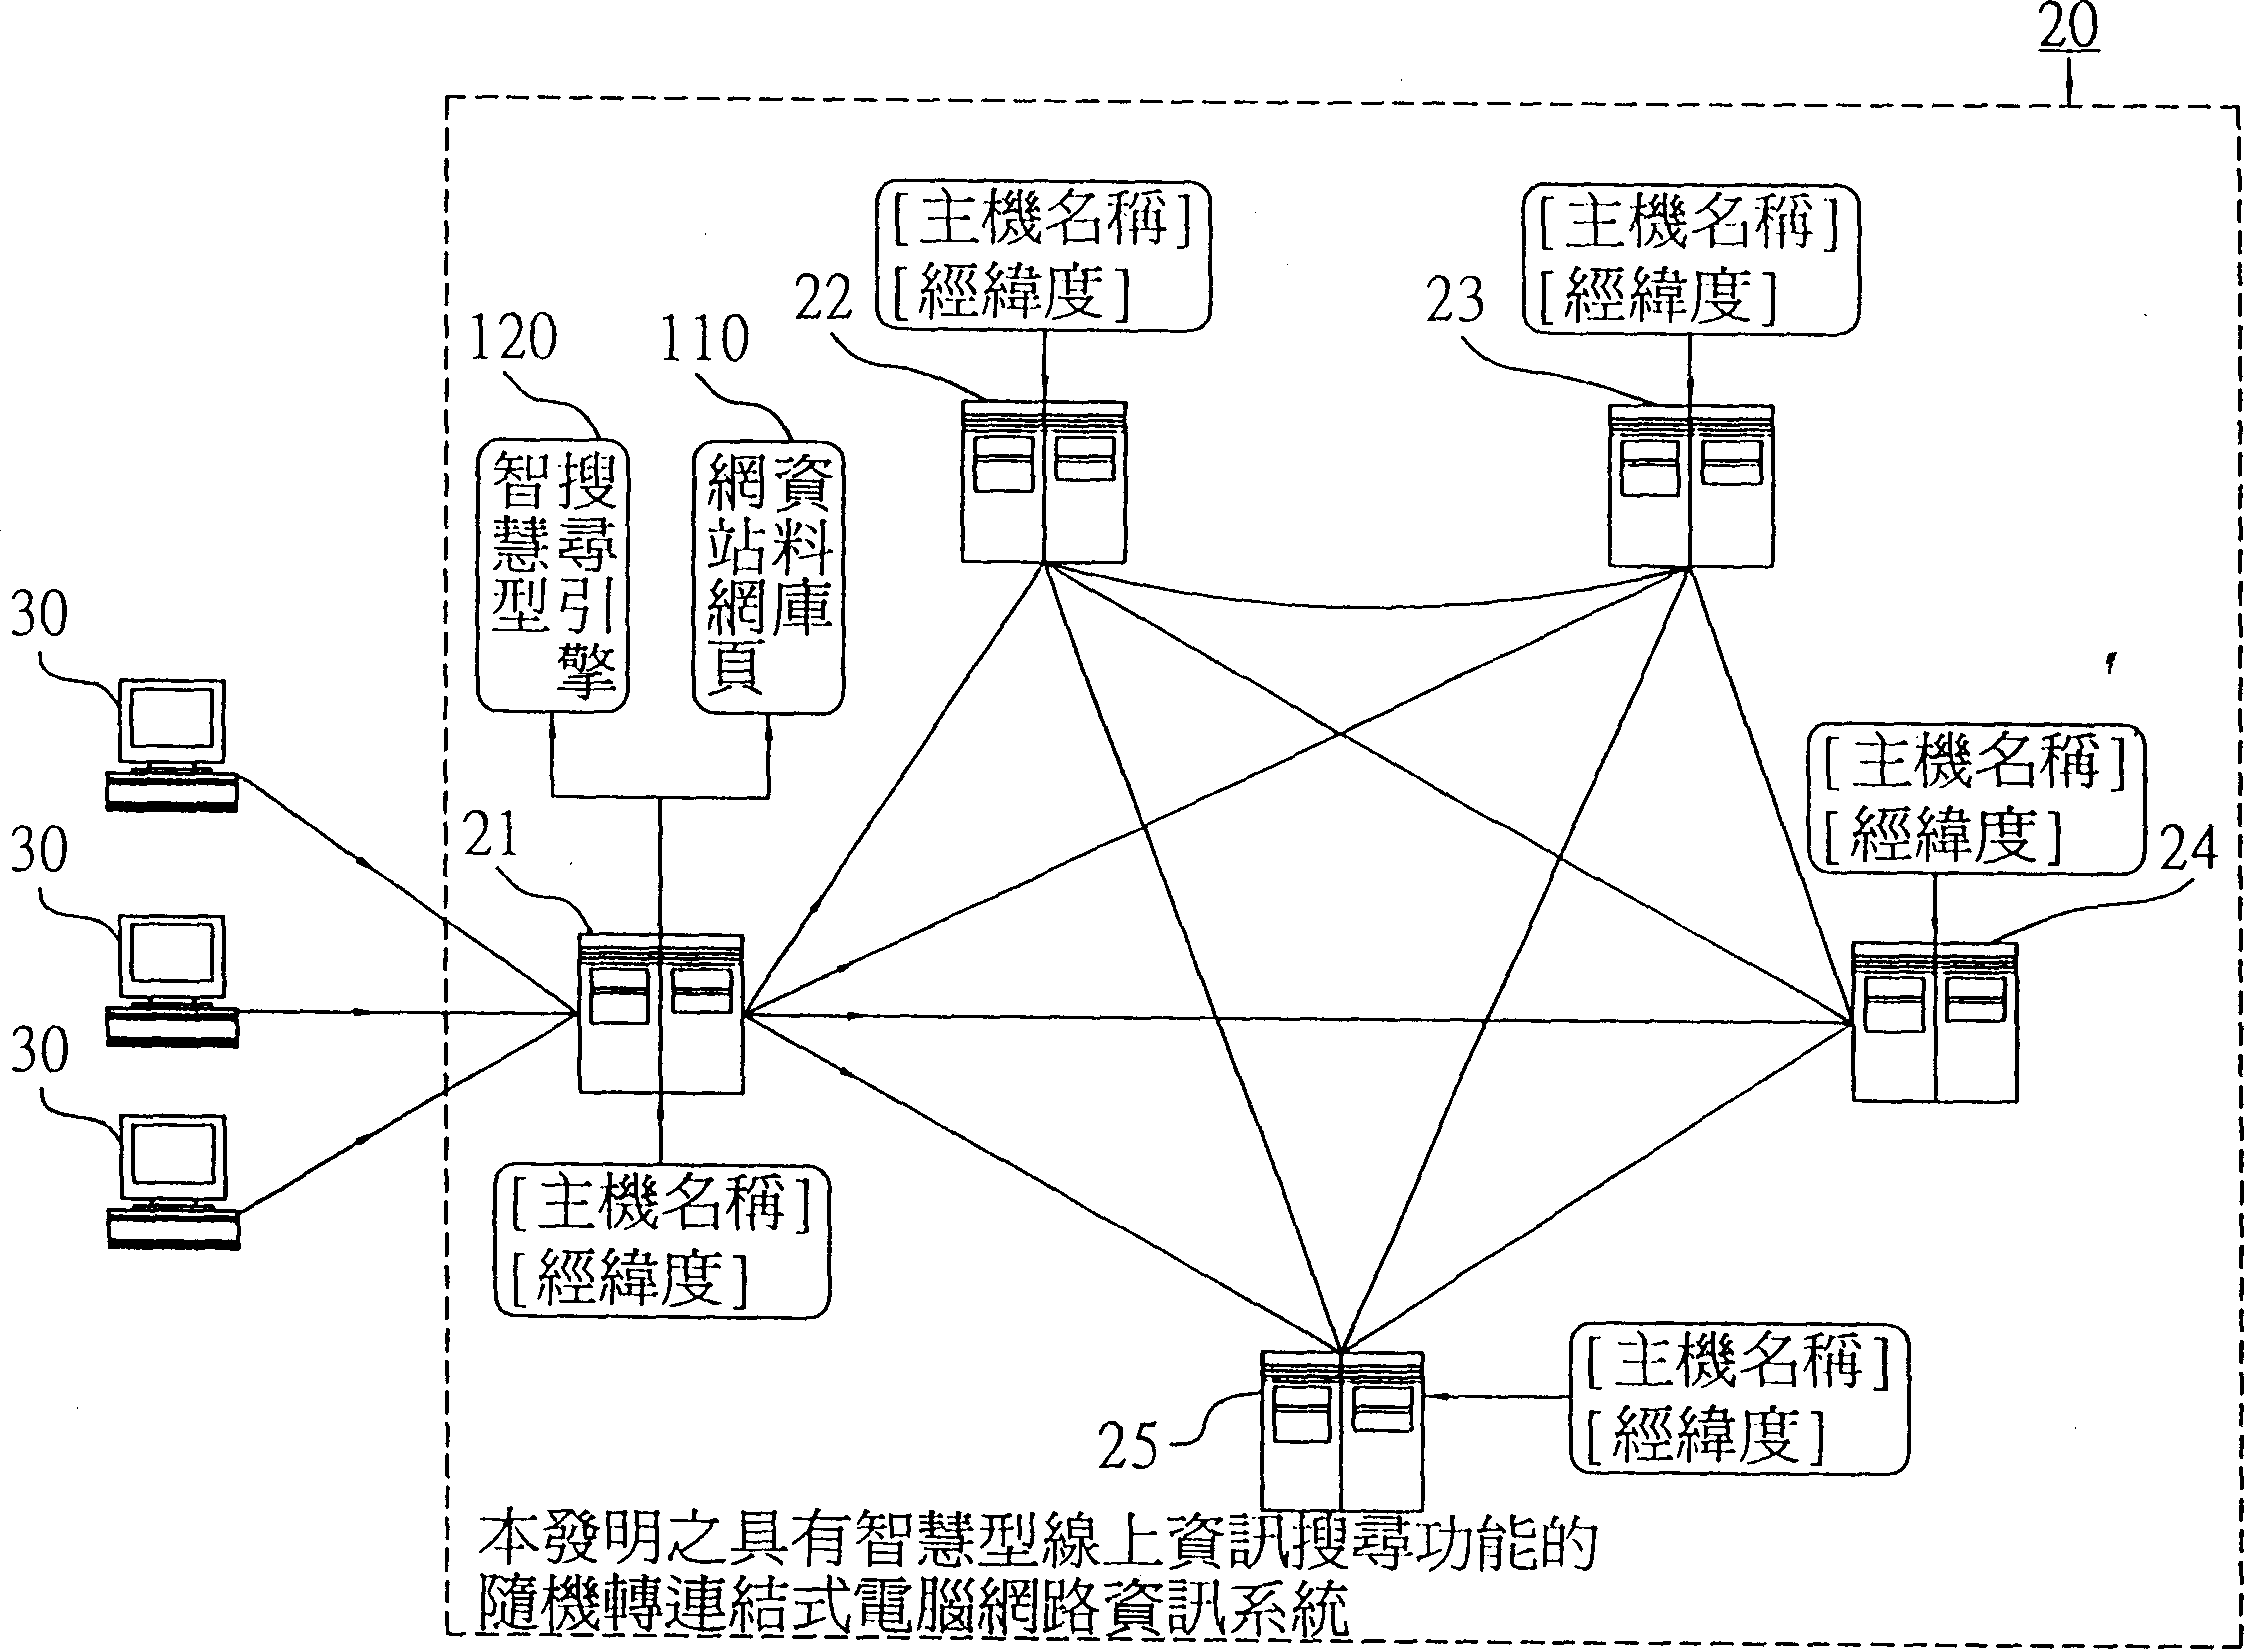 Random switchover type computer network information system possessing intelligent type online information searching function